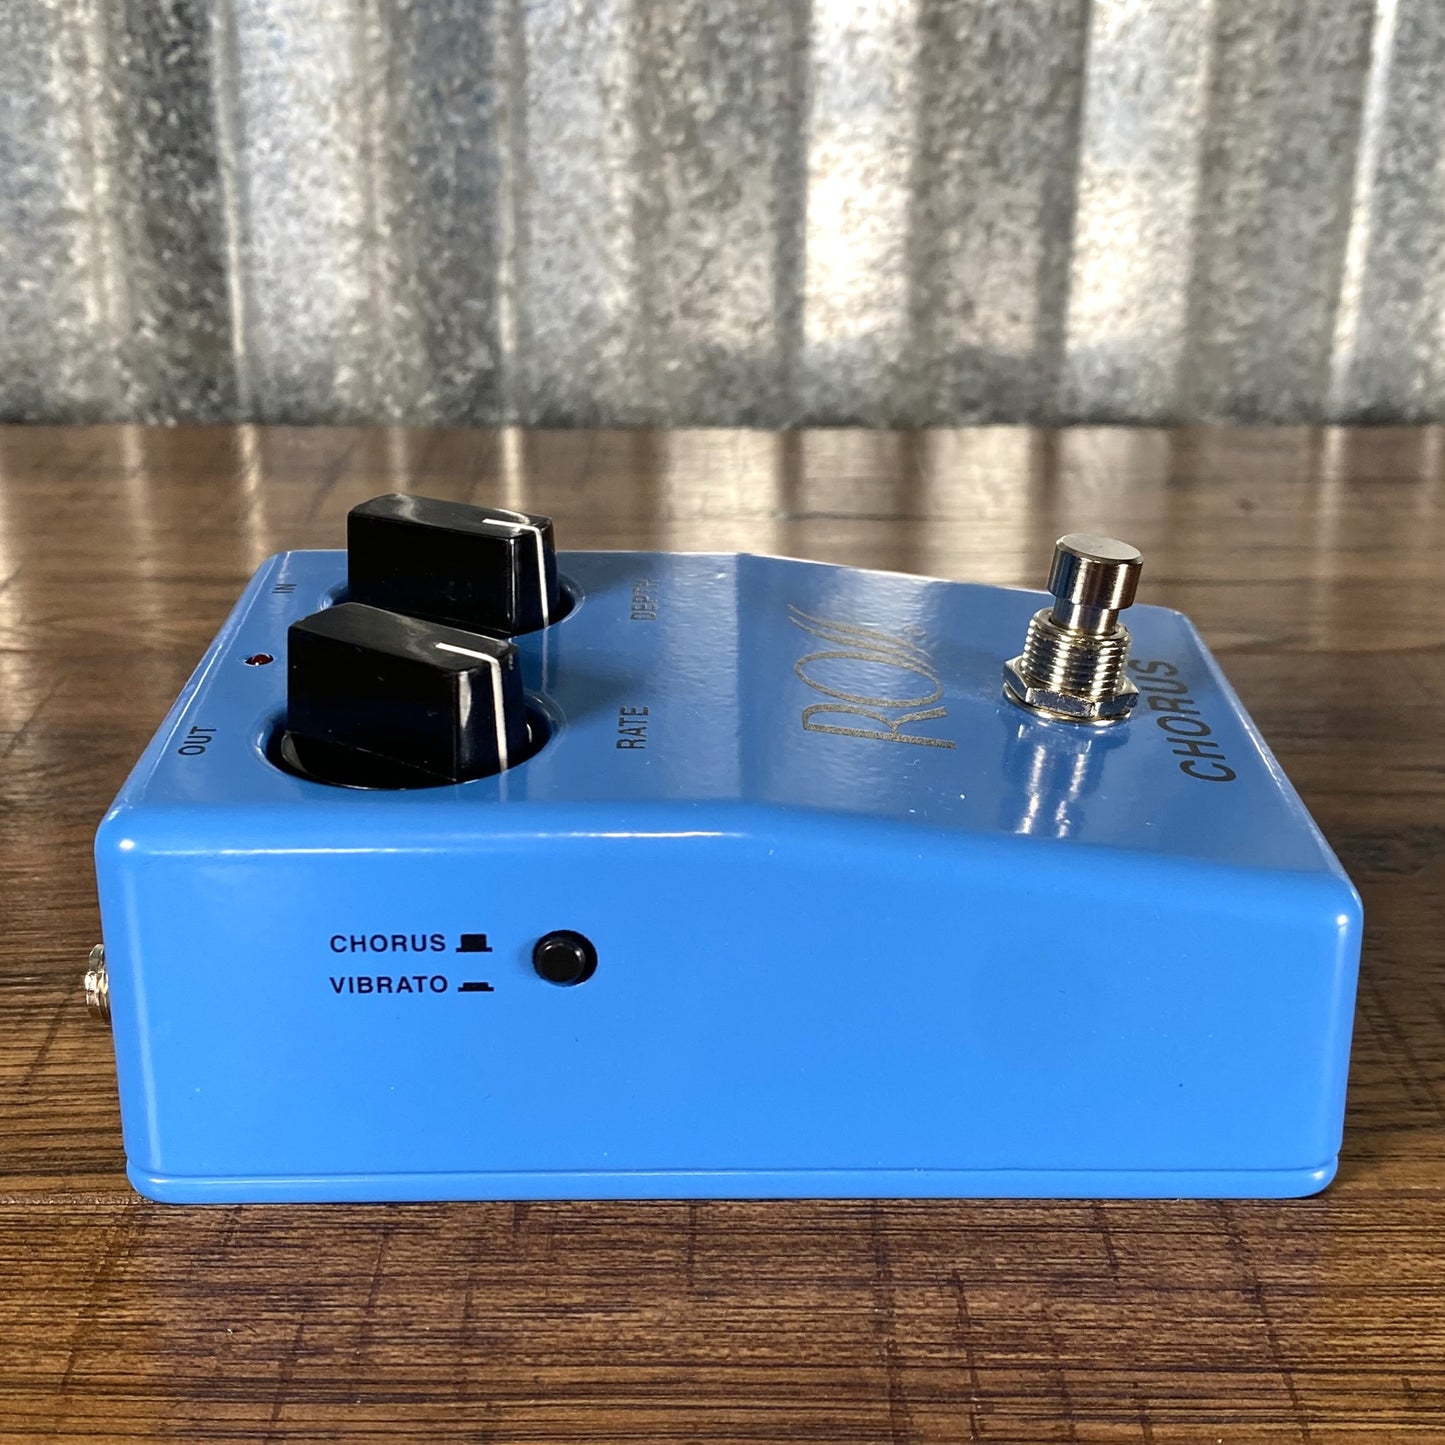 JHS ROSS Chorus Reissue Guitar Effect Pedal Used